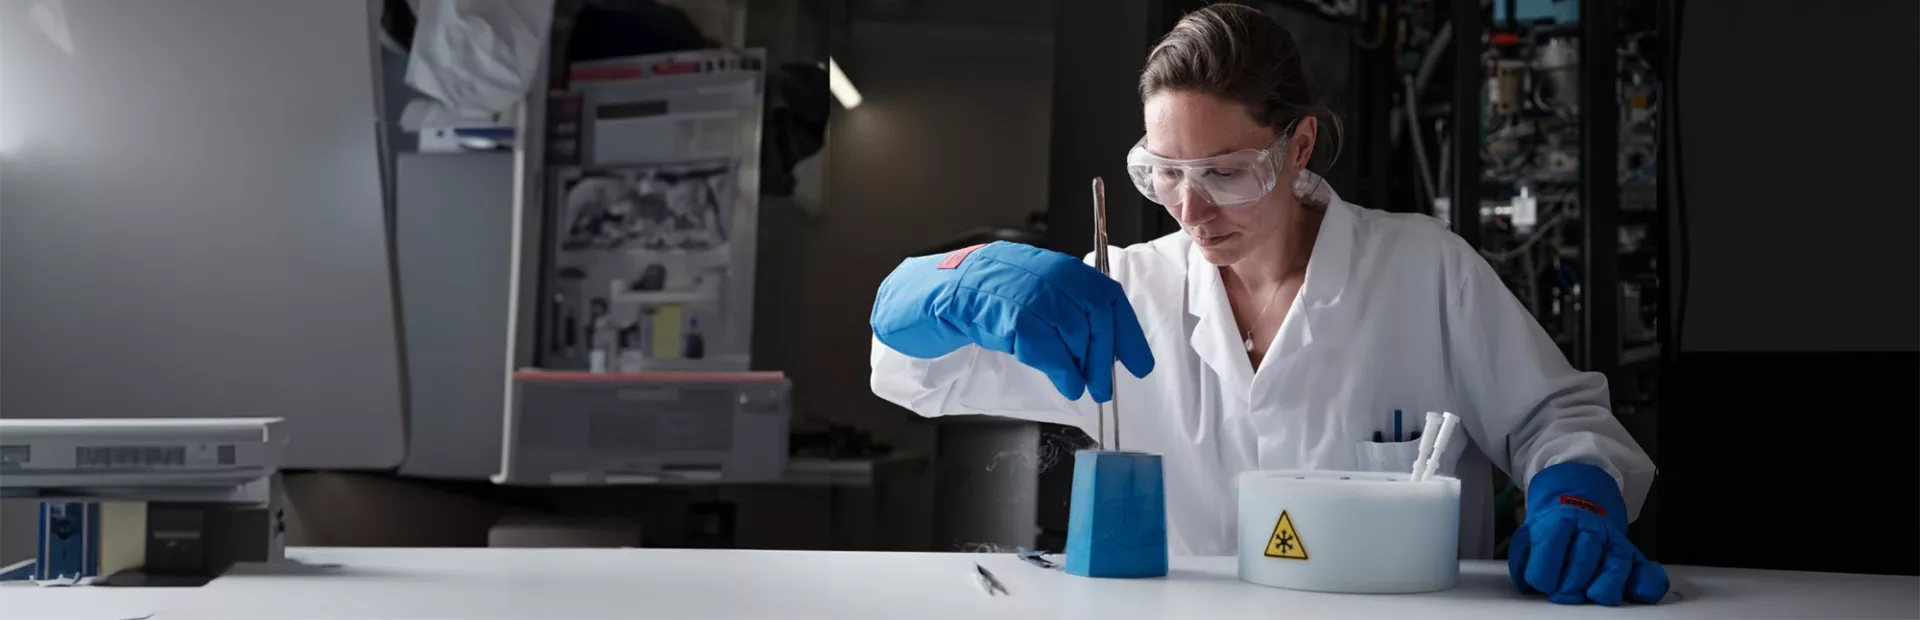 Scientist working in a lab with frozen elements